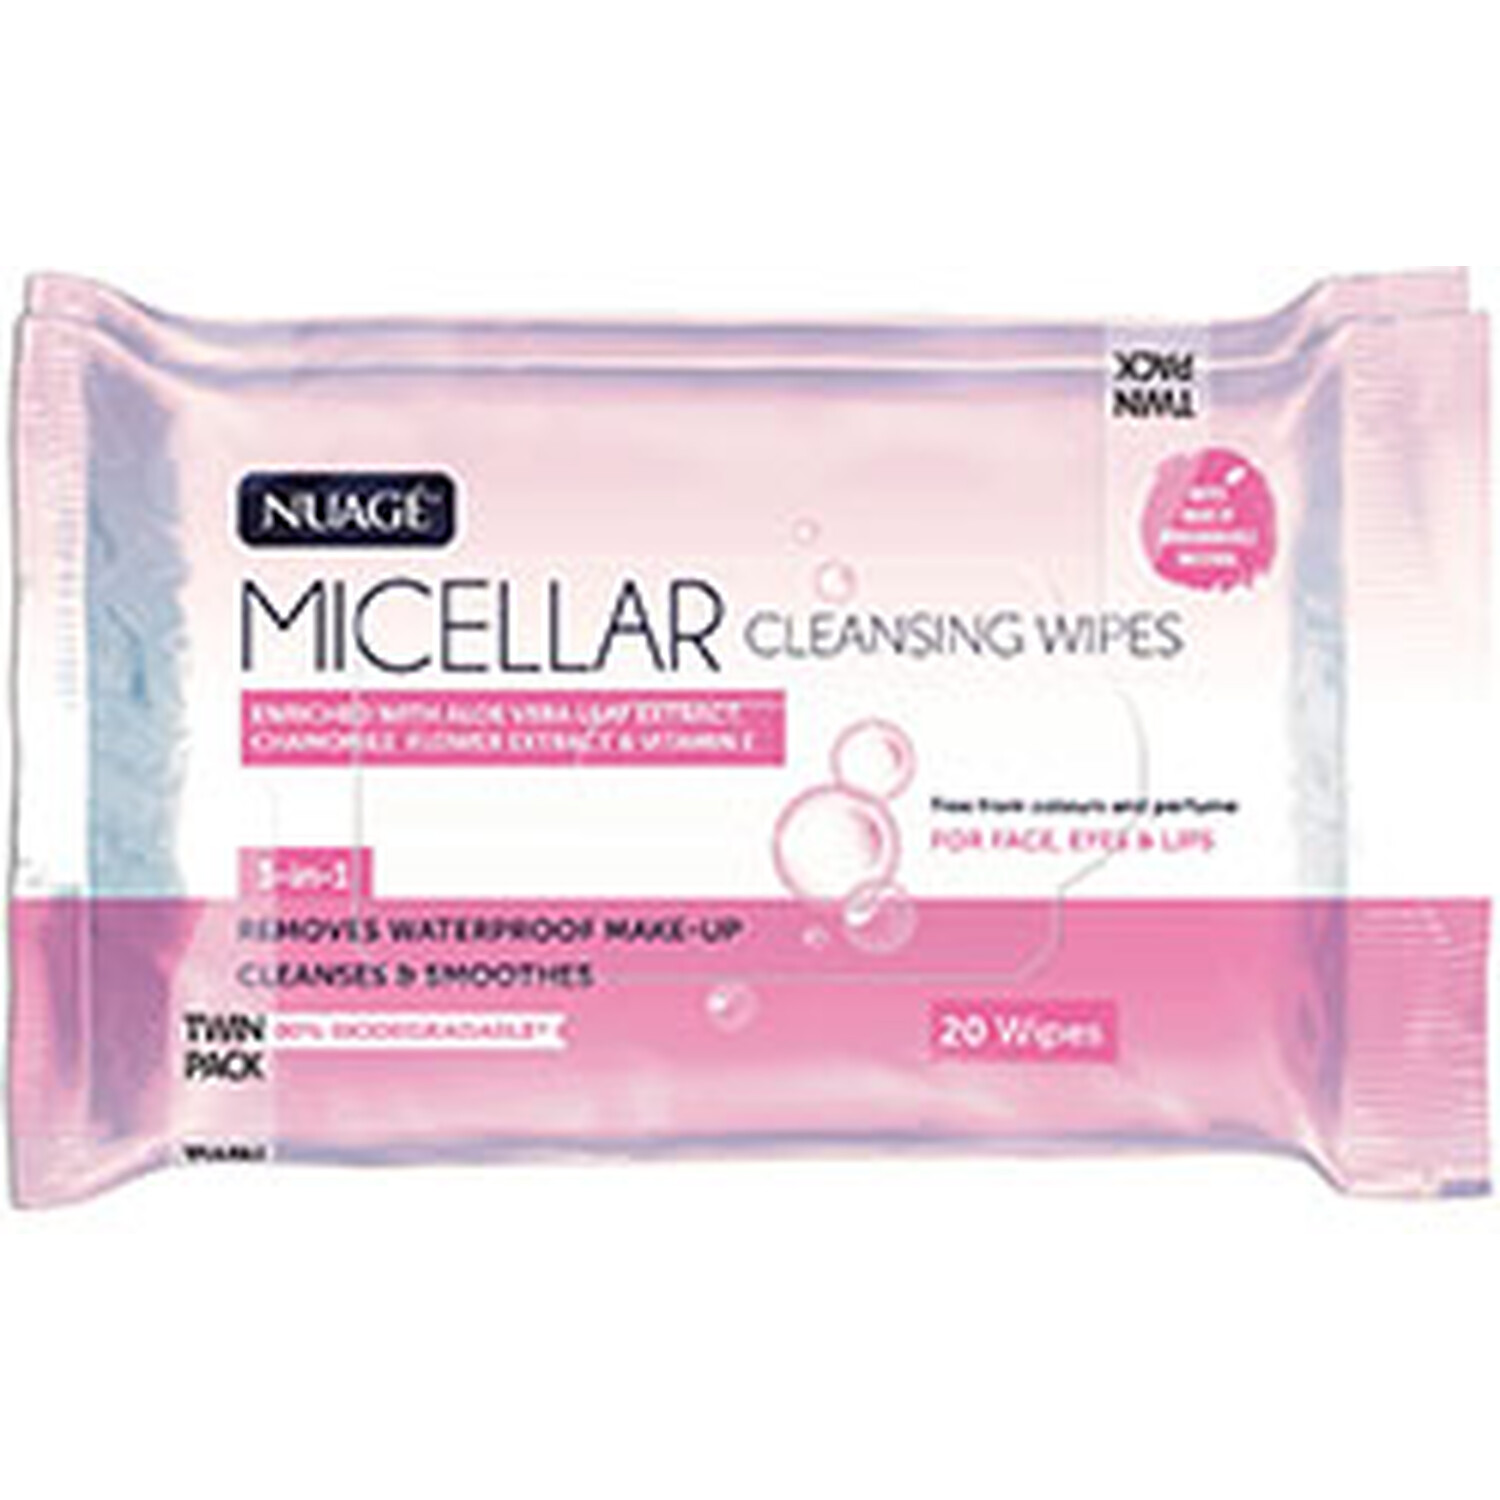 Pack of 20 Nuage Micellar Cleansing Wipes - Pink Image